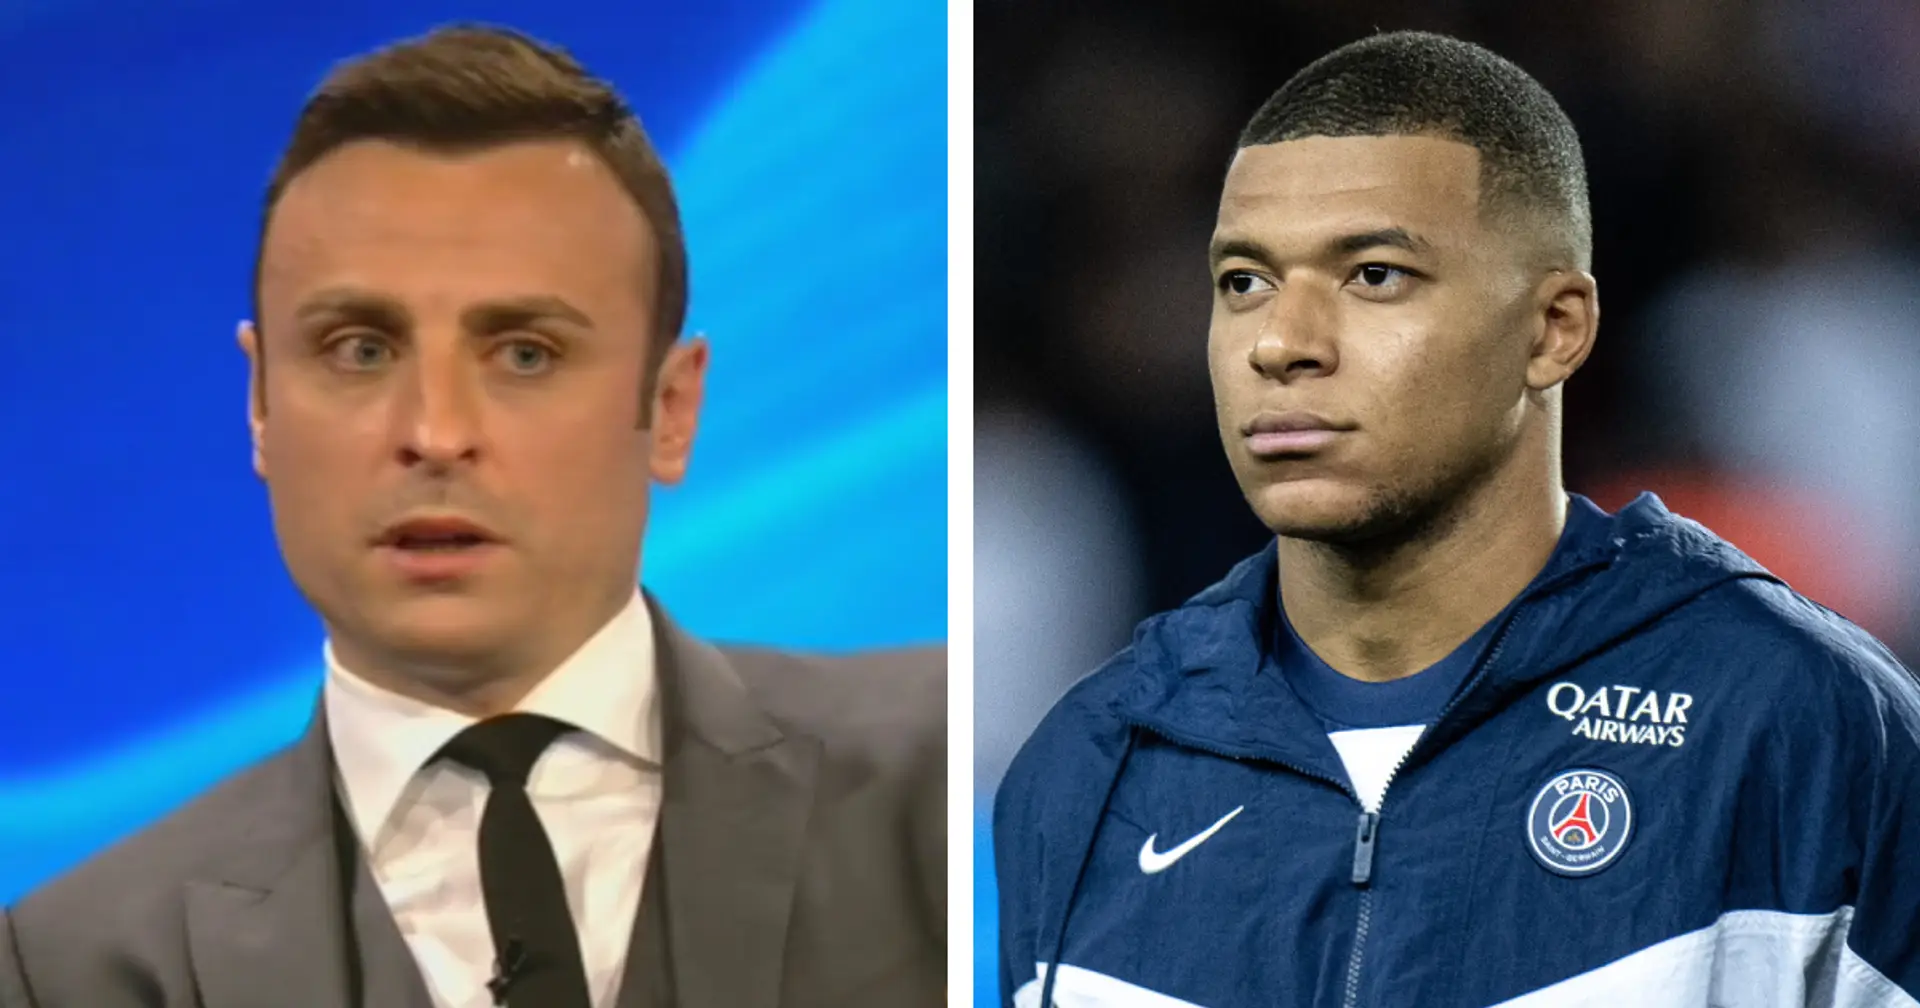 'Everybody would love to have Mbappe': Dimitar Berbatov reacts to bizarre Man United links with Kylian